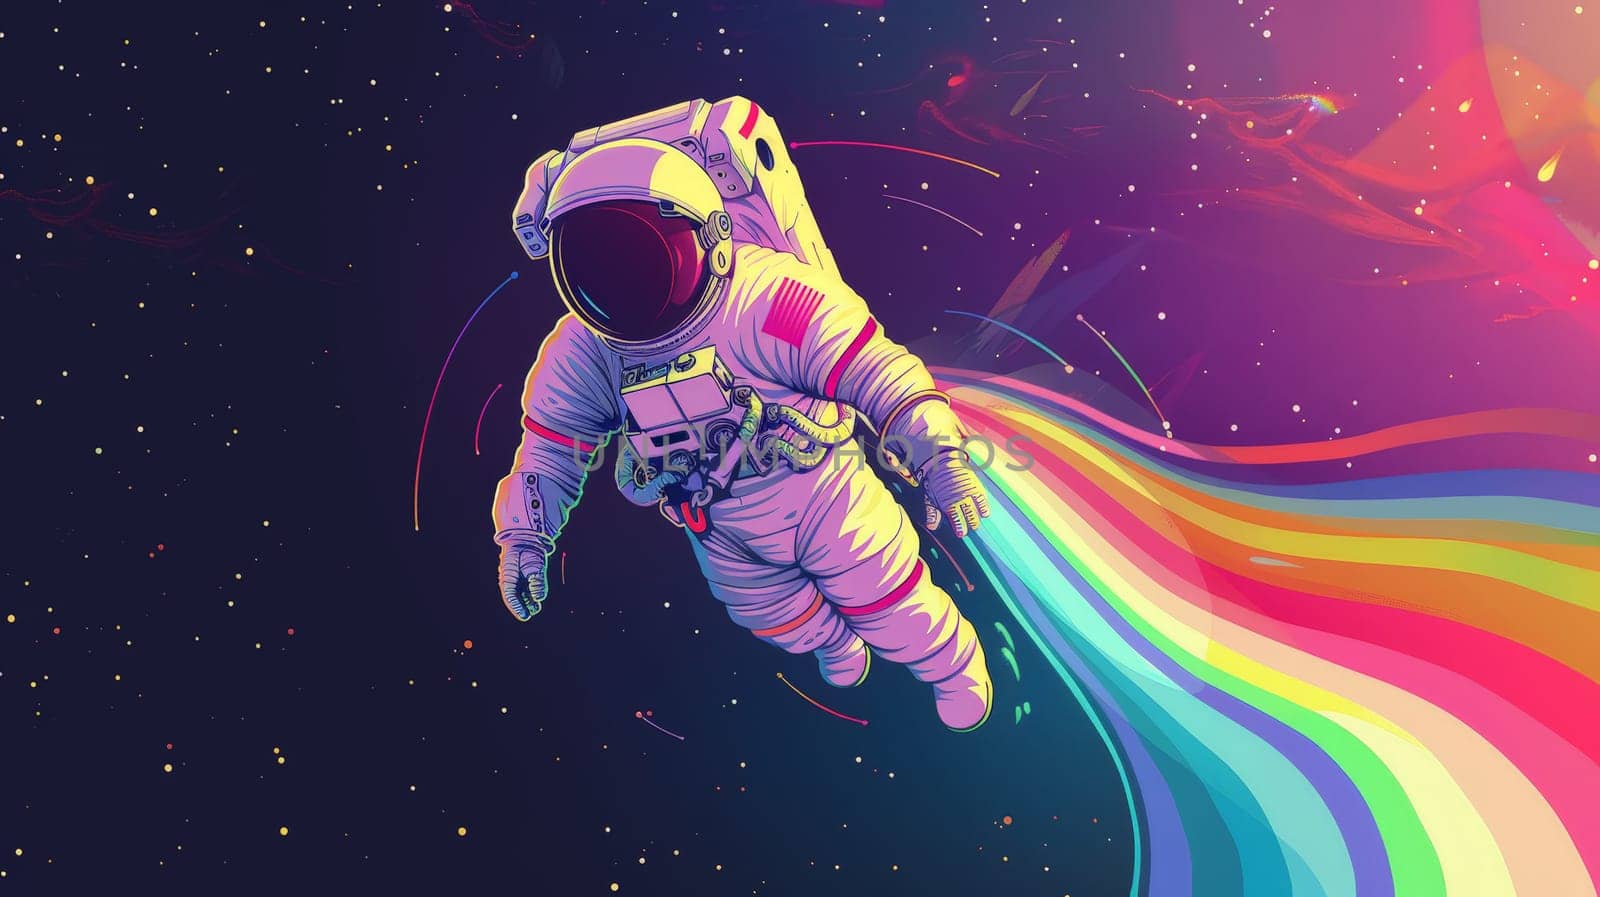 An astronaut in space with rainbow, Abstract wallpaper, Colorful art of astronaut in the space.